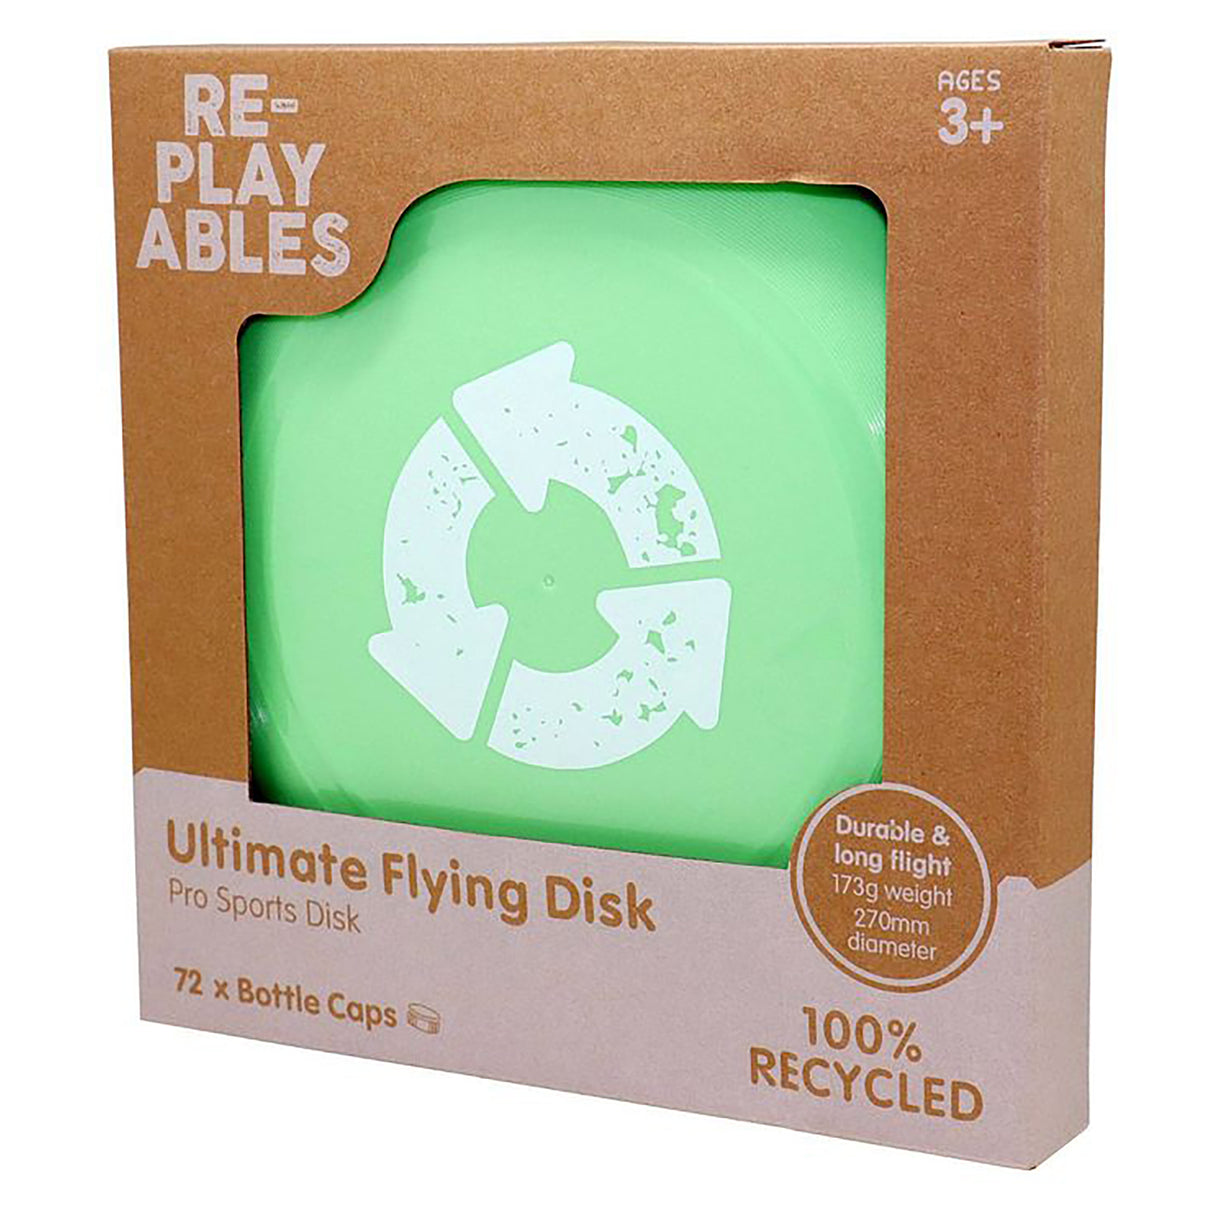 Replayables Ultimate Flying Disc